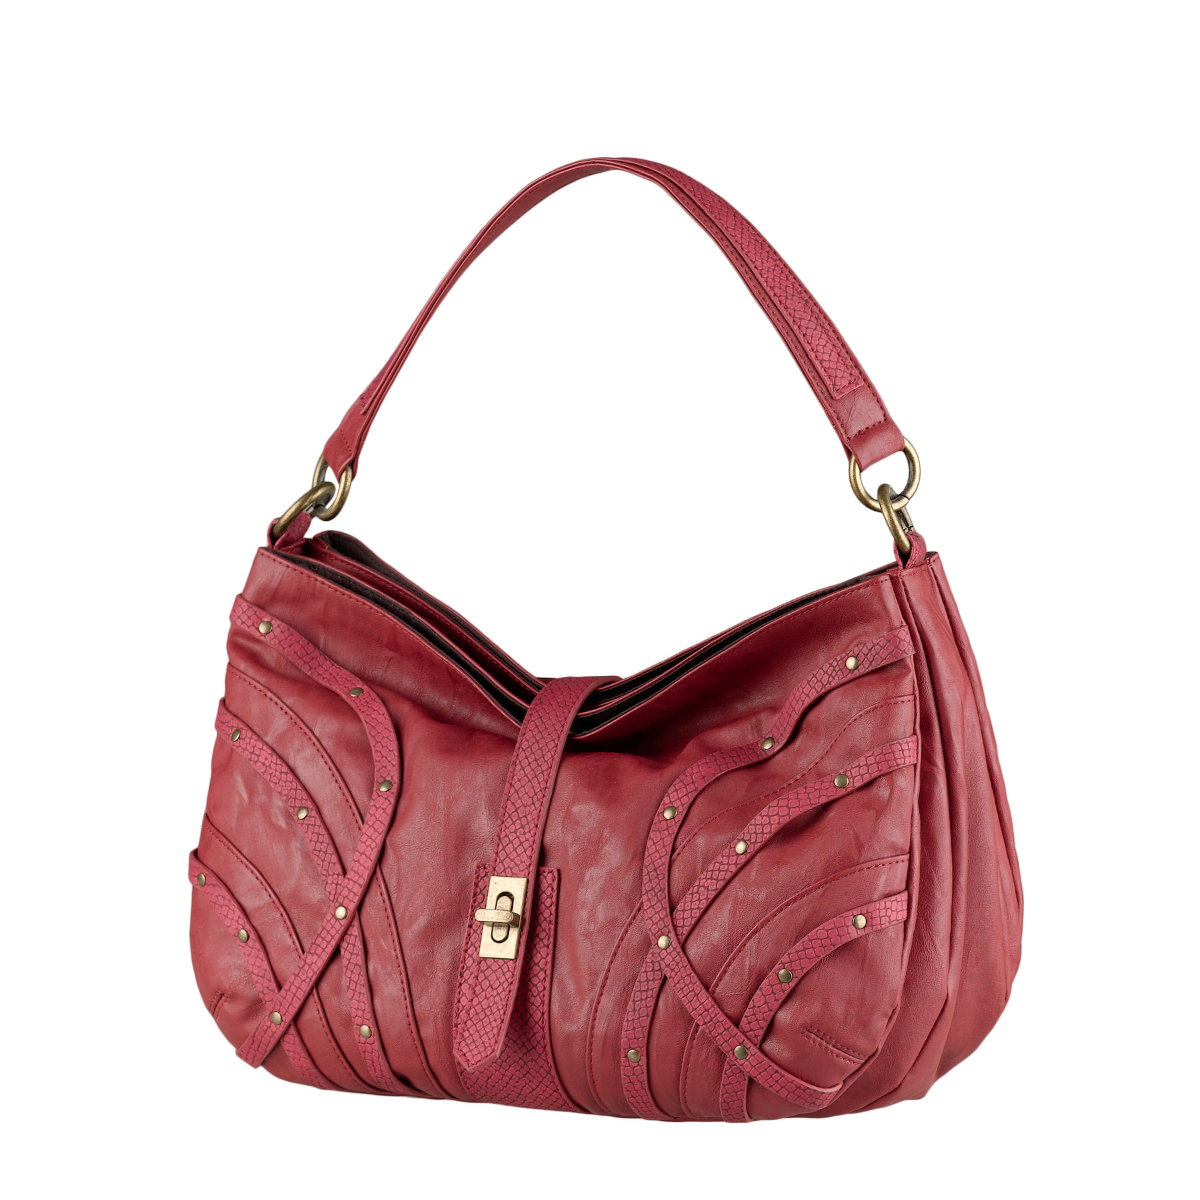 12. Timeless Elegance: Traditional Leather Handbag - The Perfect Year Anniversary Gift